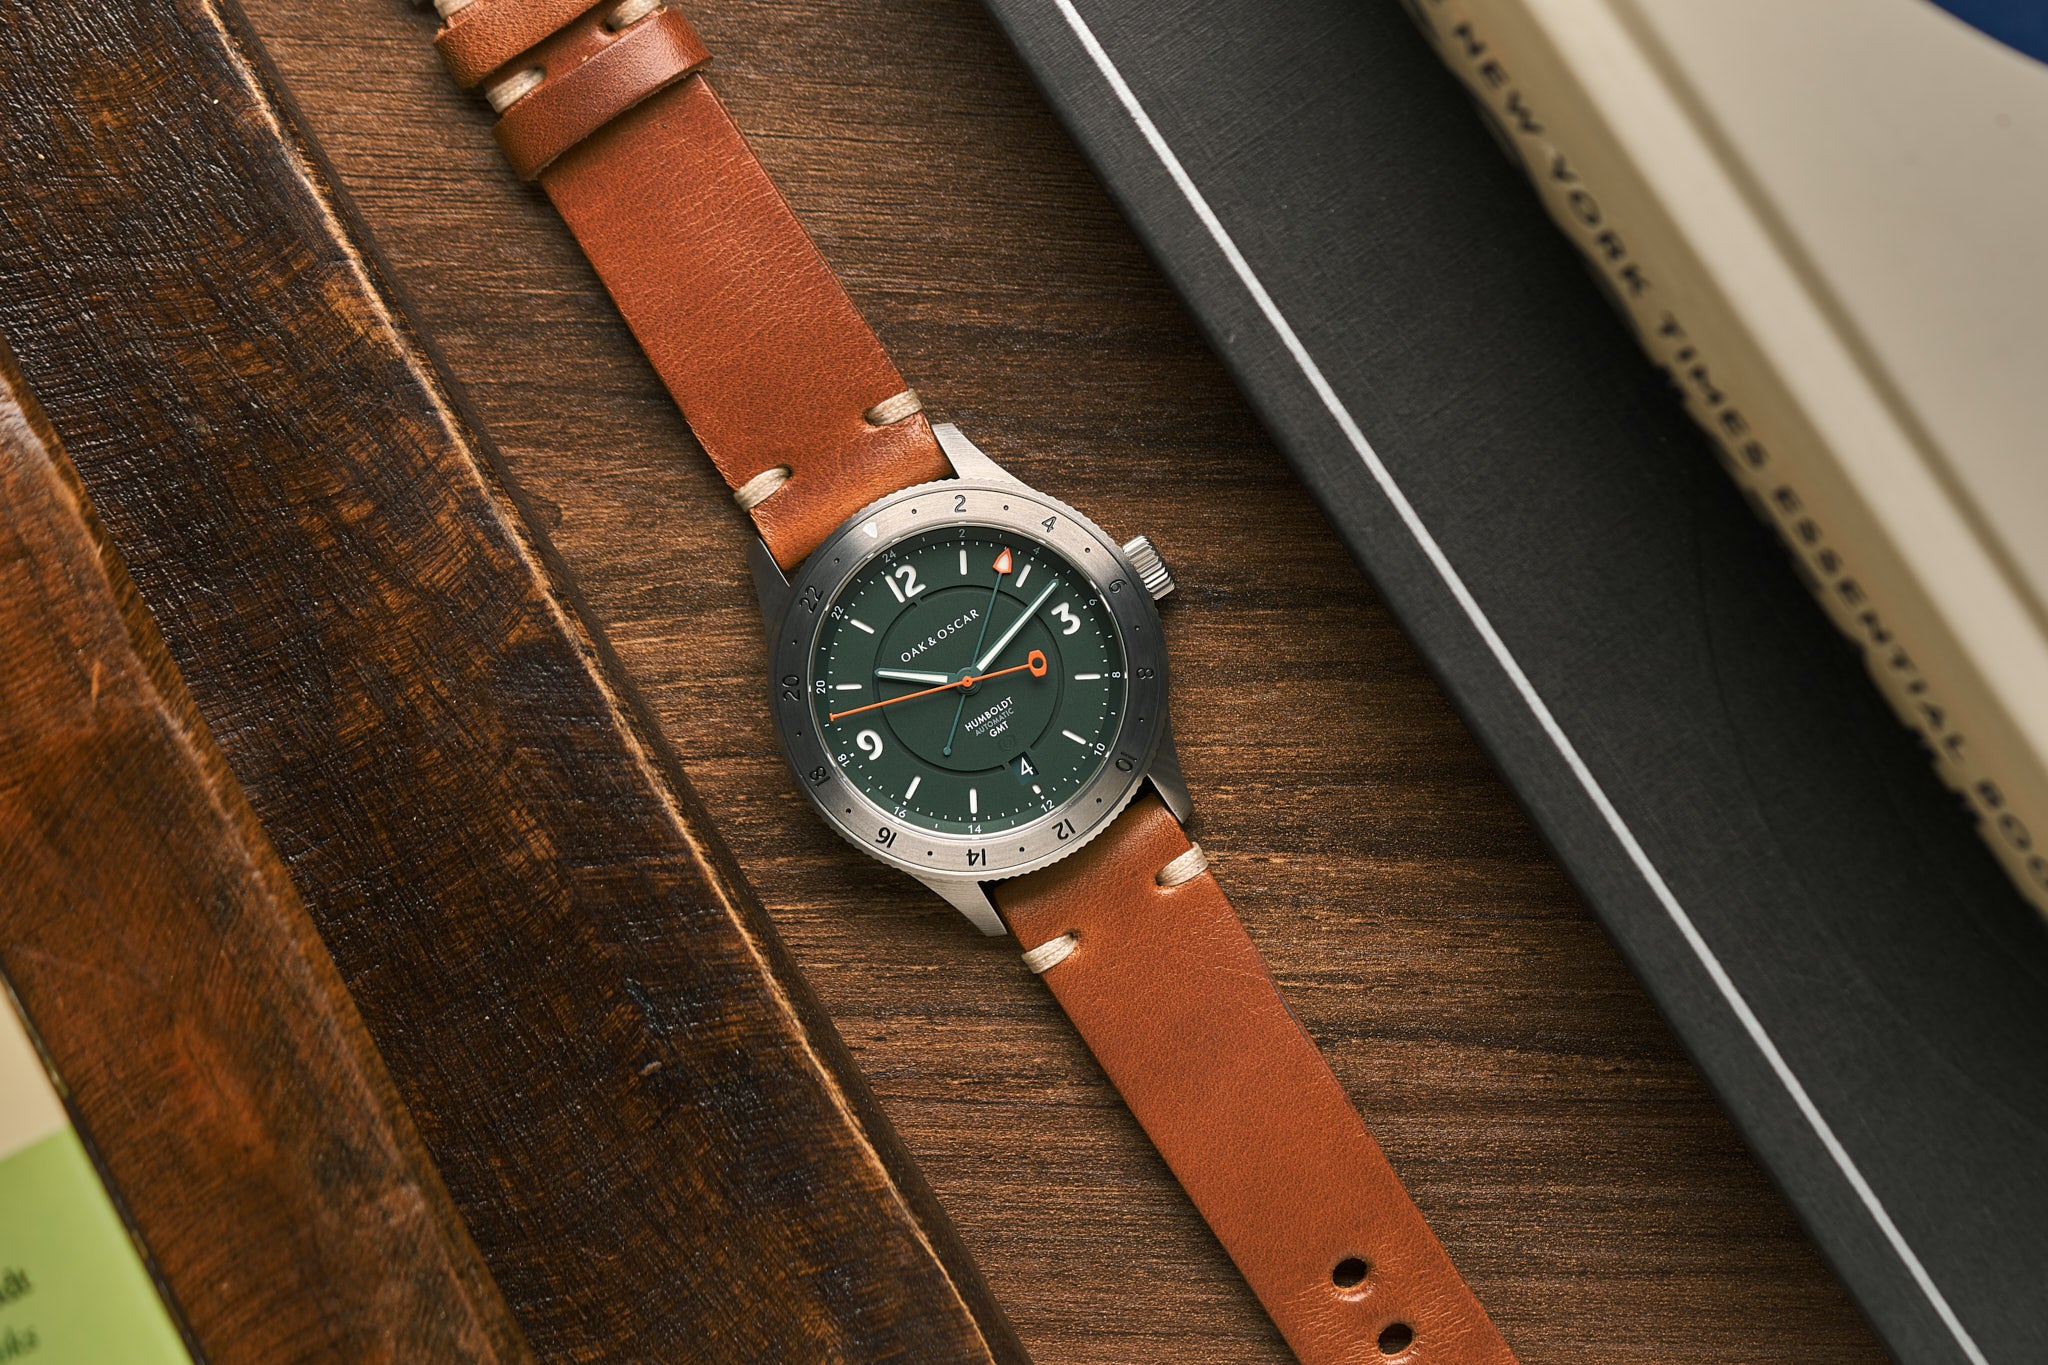 Humboldt GMT Titanium with green dial on brown Horween leather strap